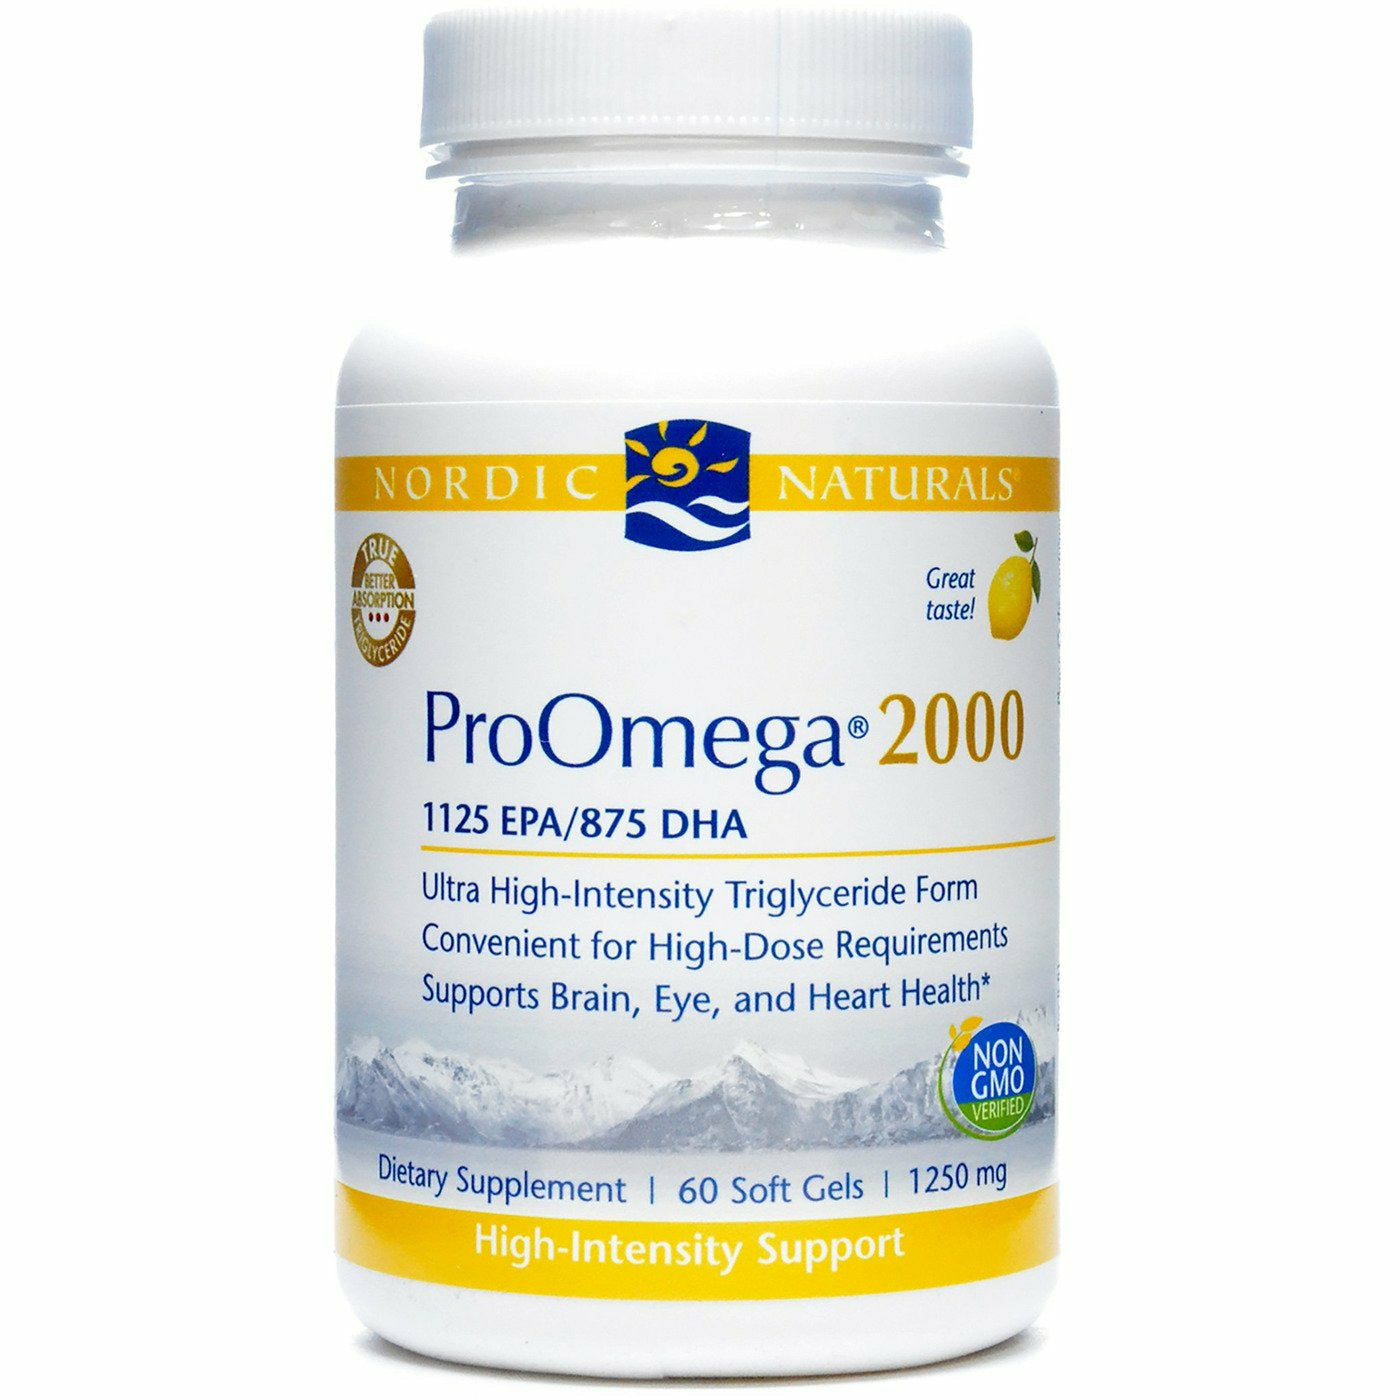 Image of ProOmega 2000 by Nordic Naturals